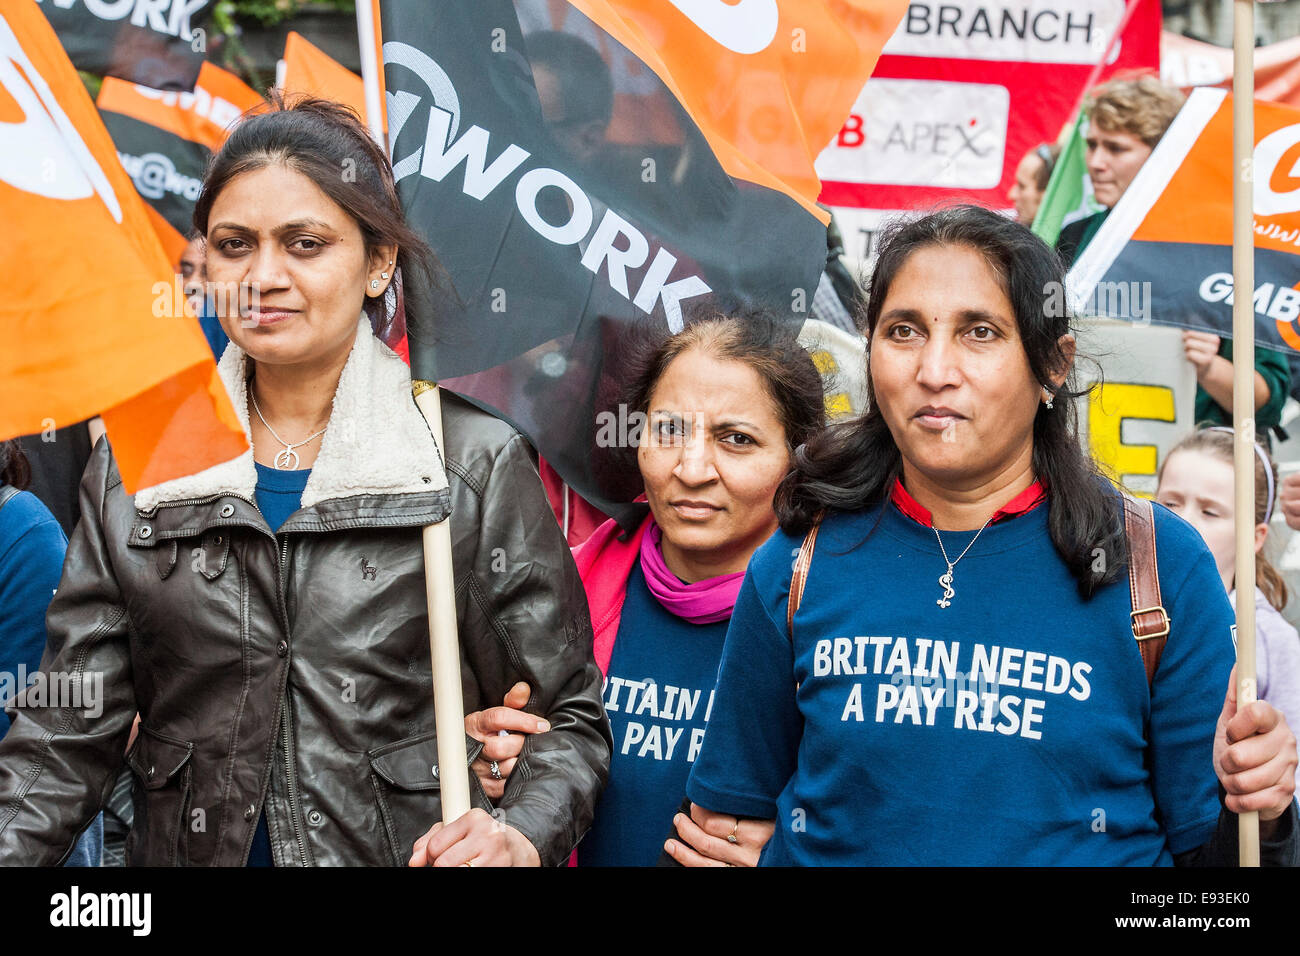 London, UK. 18th October, 2014. Britain needs a pay rise - A march organised by the TUC to demand fairer and pay rises for the lowest paid and particularly in the public sector. The march started at Embankment, passed through Trafalgar Square and ended with speeches in Hyde Park. Credit:  Guy Bell/Alamy Live News Stock Photo